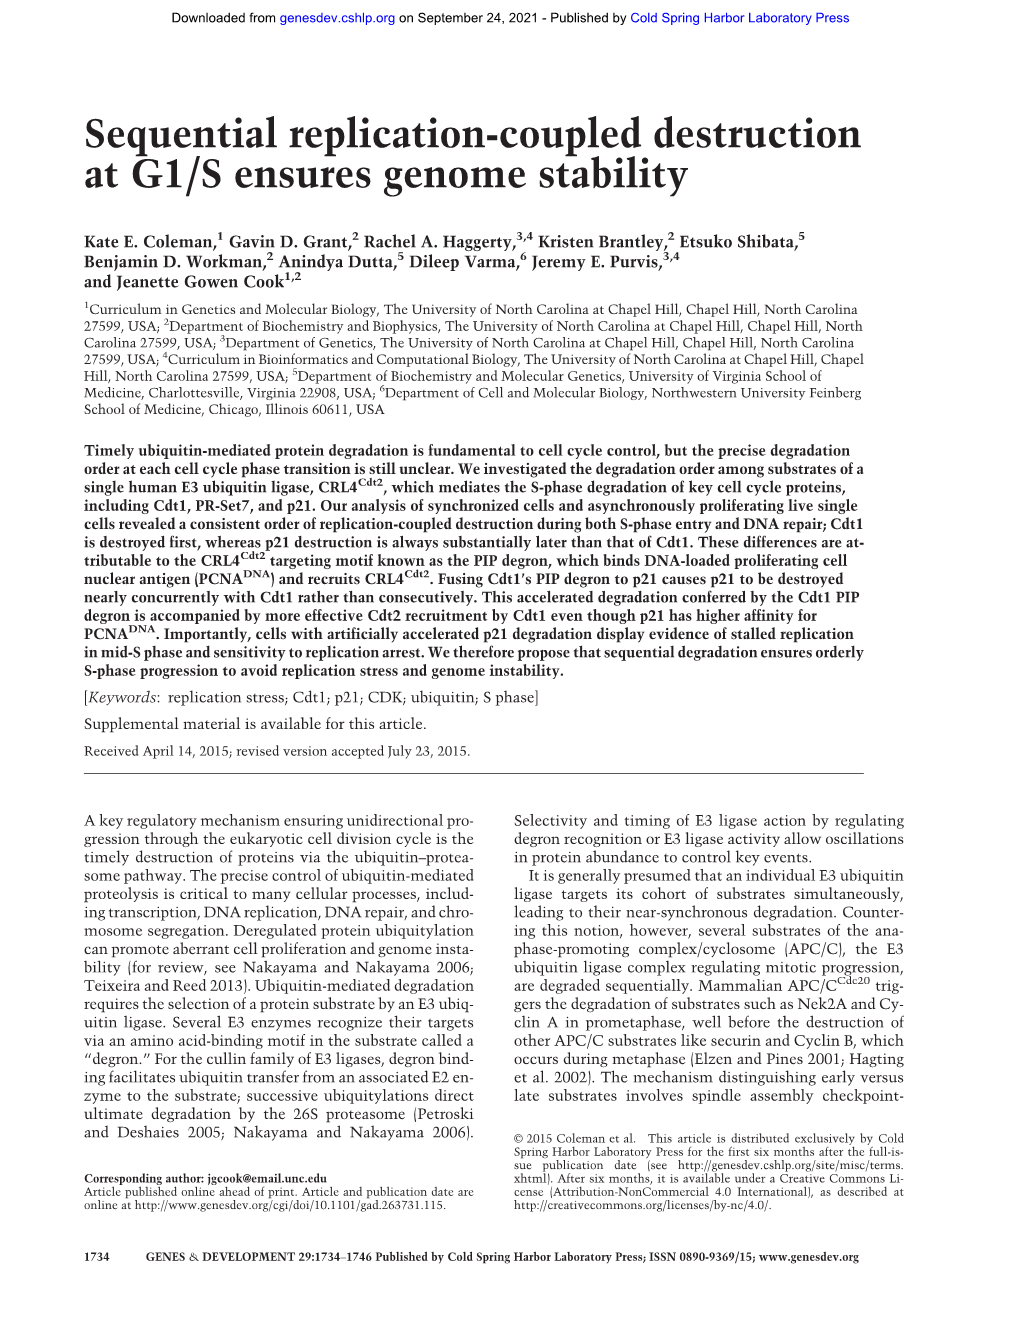 Sequential Replication-Coupled Destruction at G1/S Ensures Genome Stability